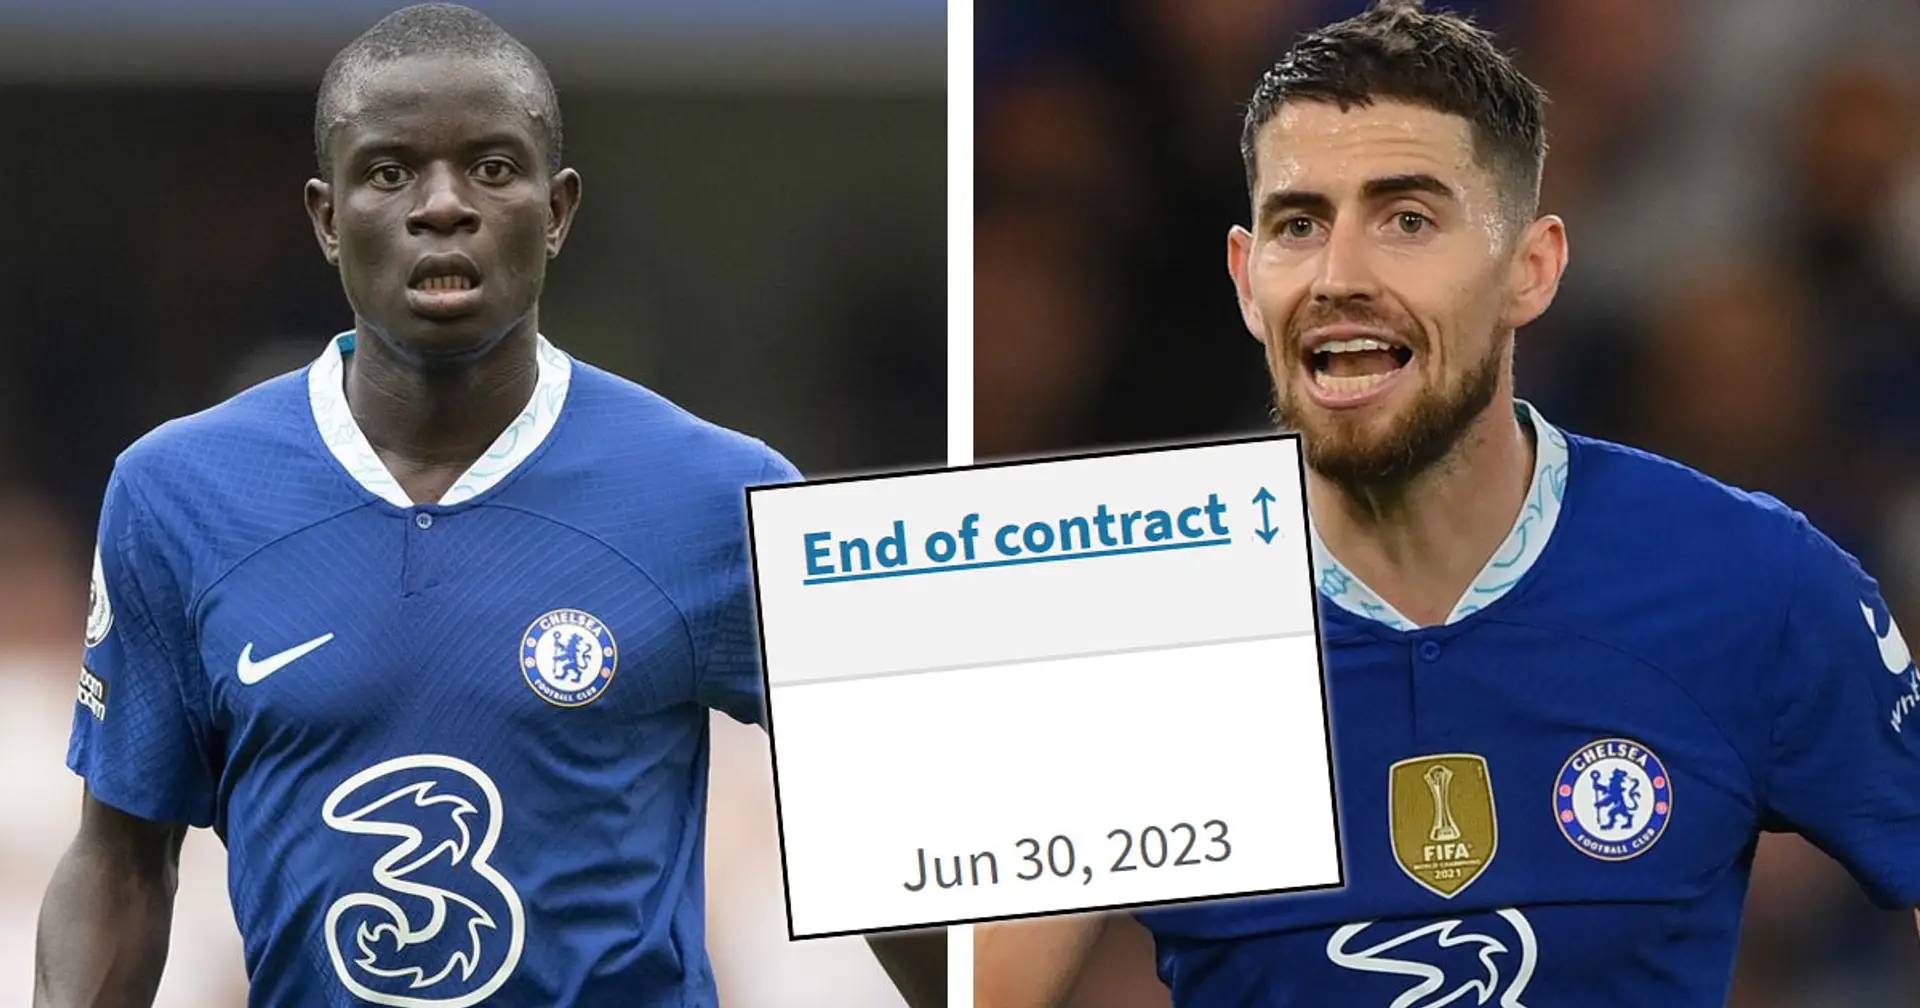 4 Chelsea players free to start negotiations with other clubs from today – we name them